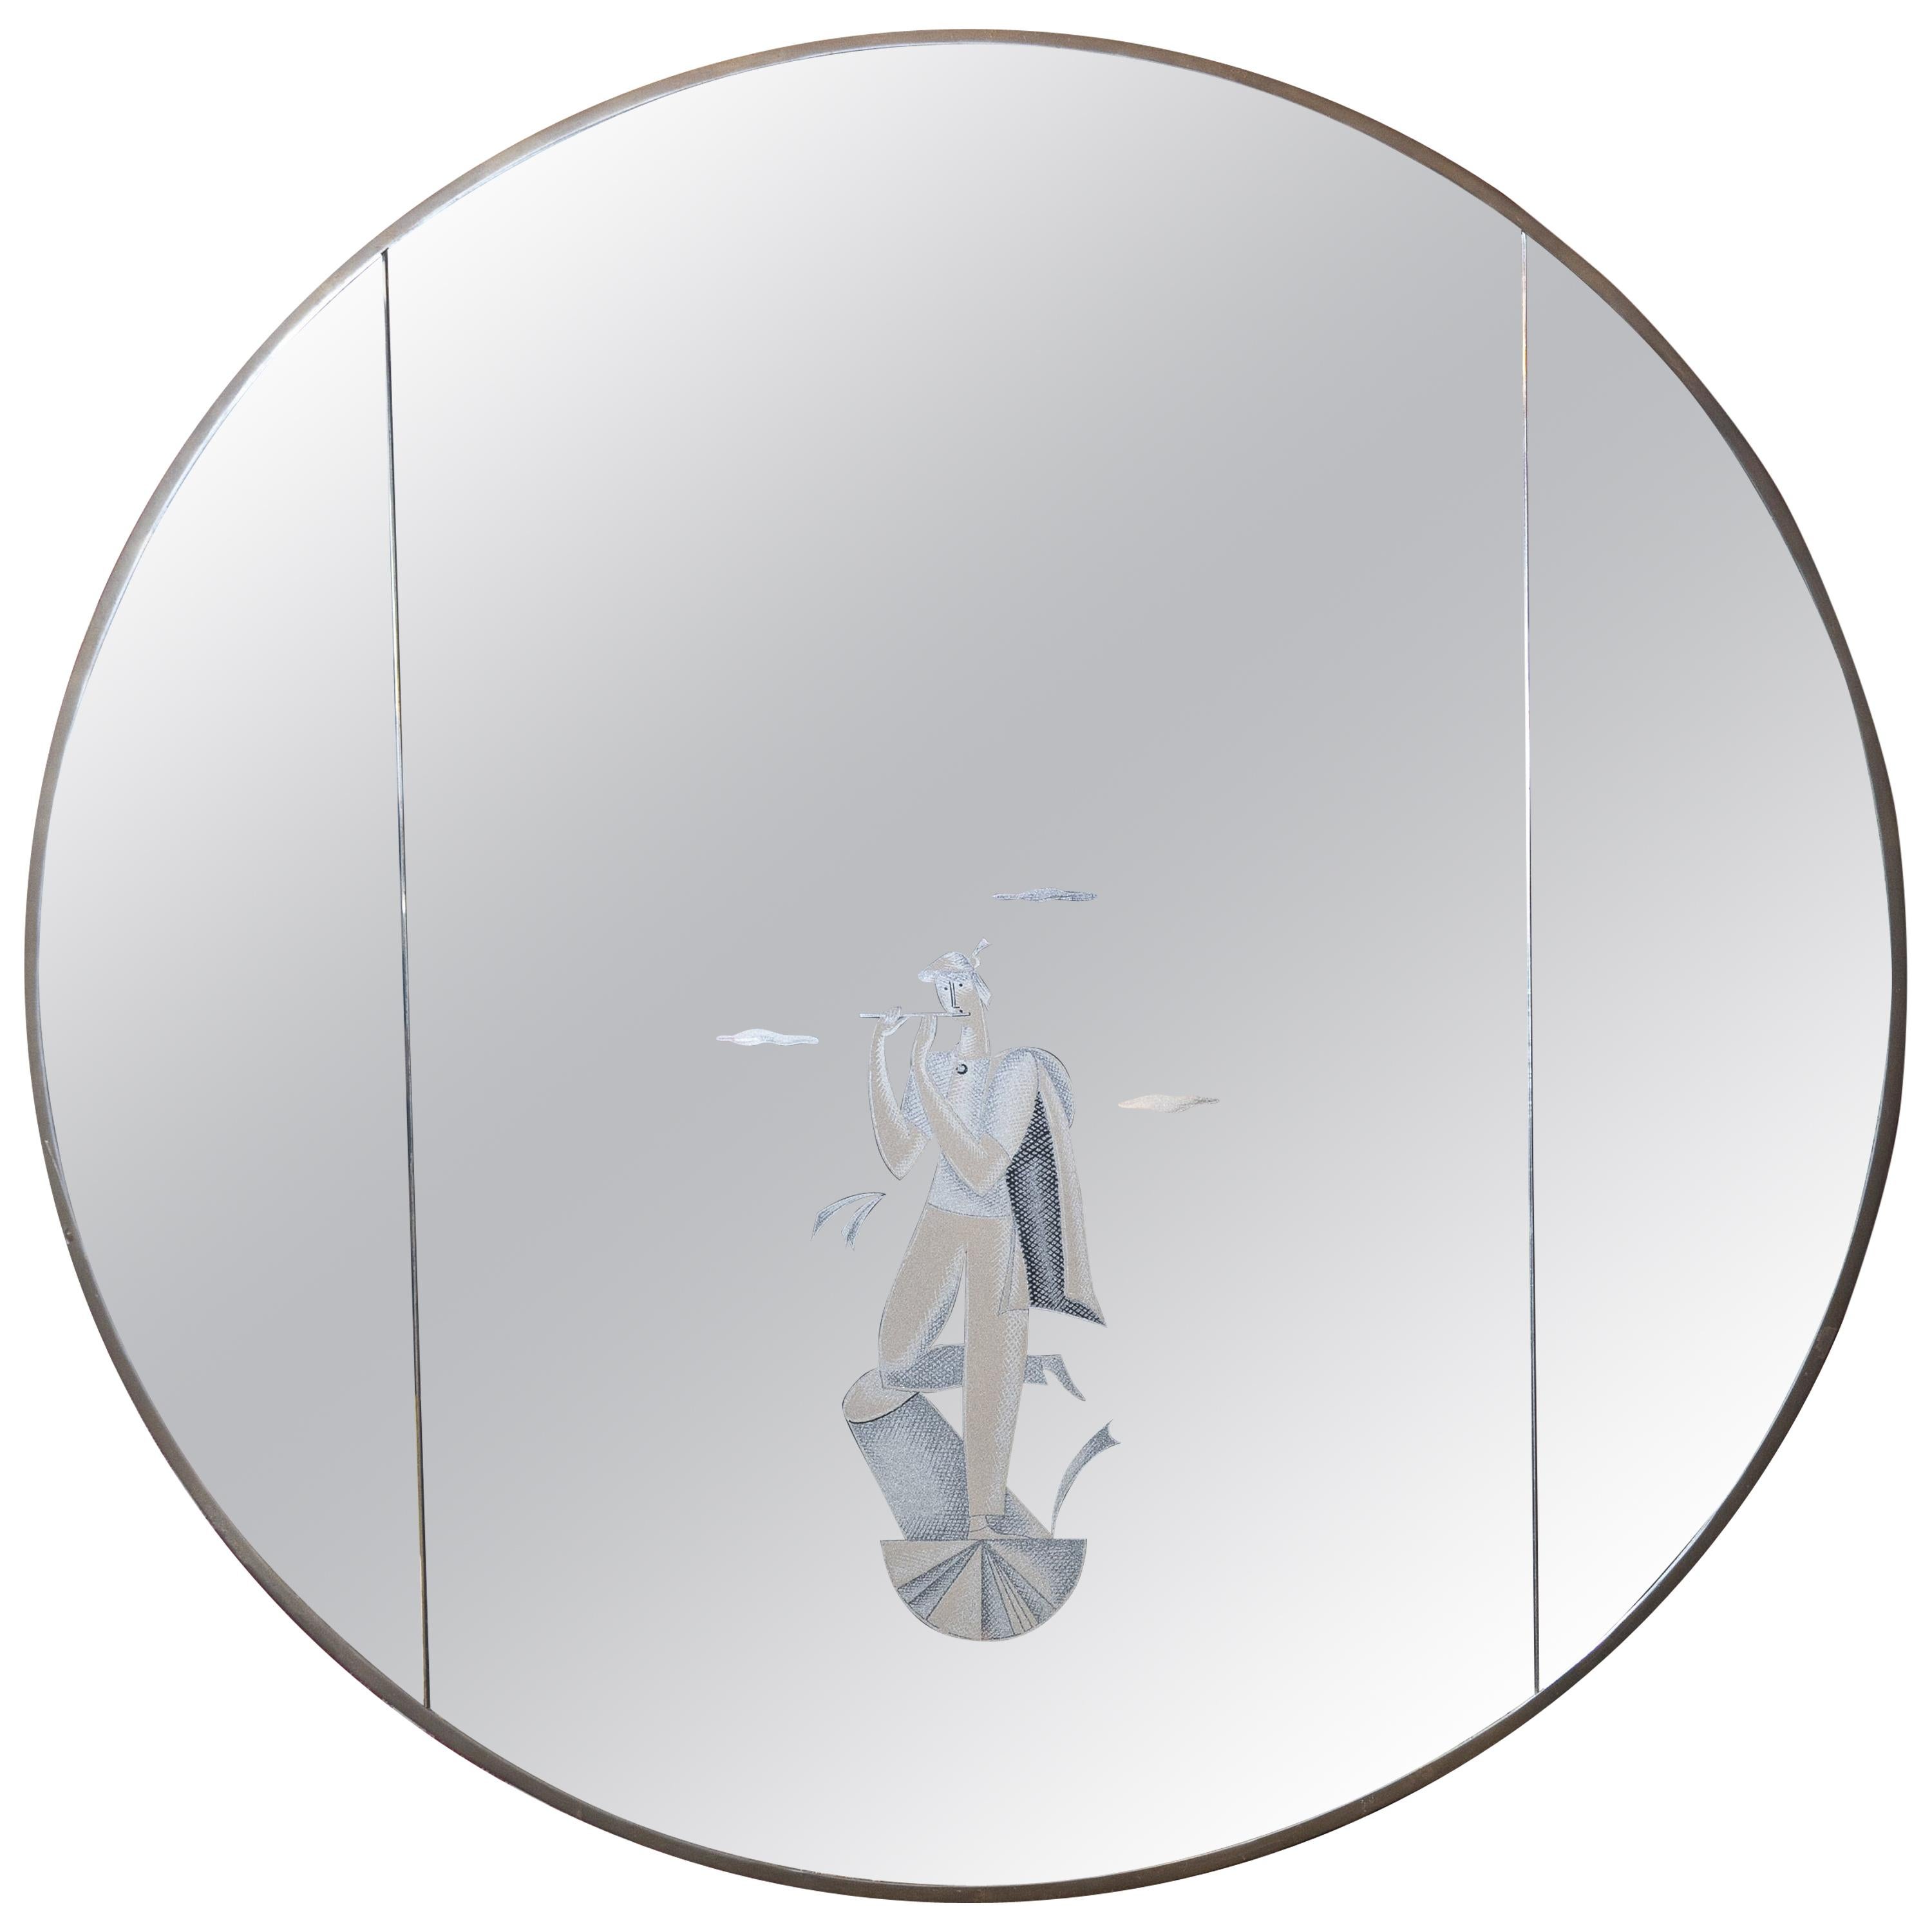 BBPR Architects' Studio, Round Serigraphed Mirror, Made in Italy, circa 1960